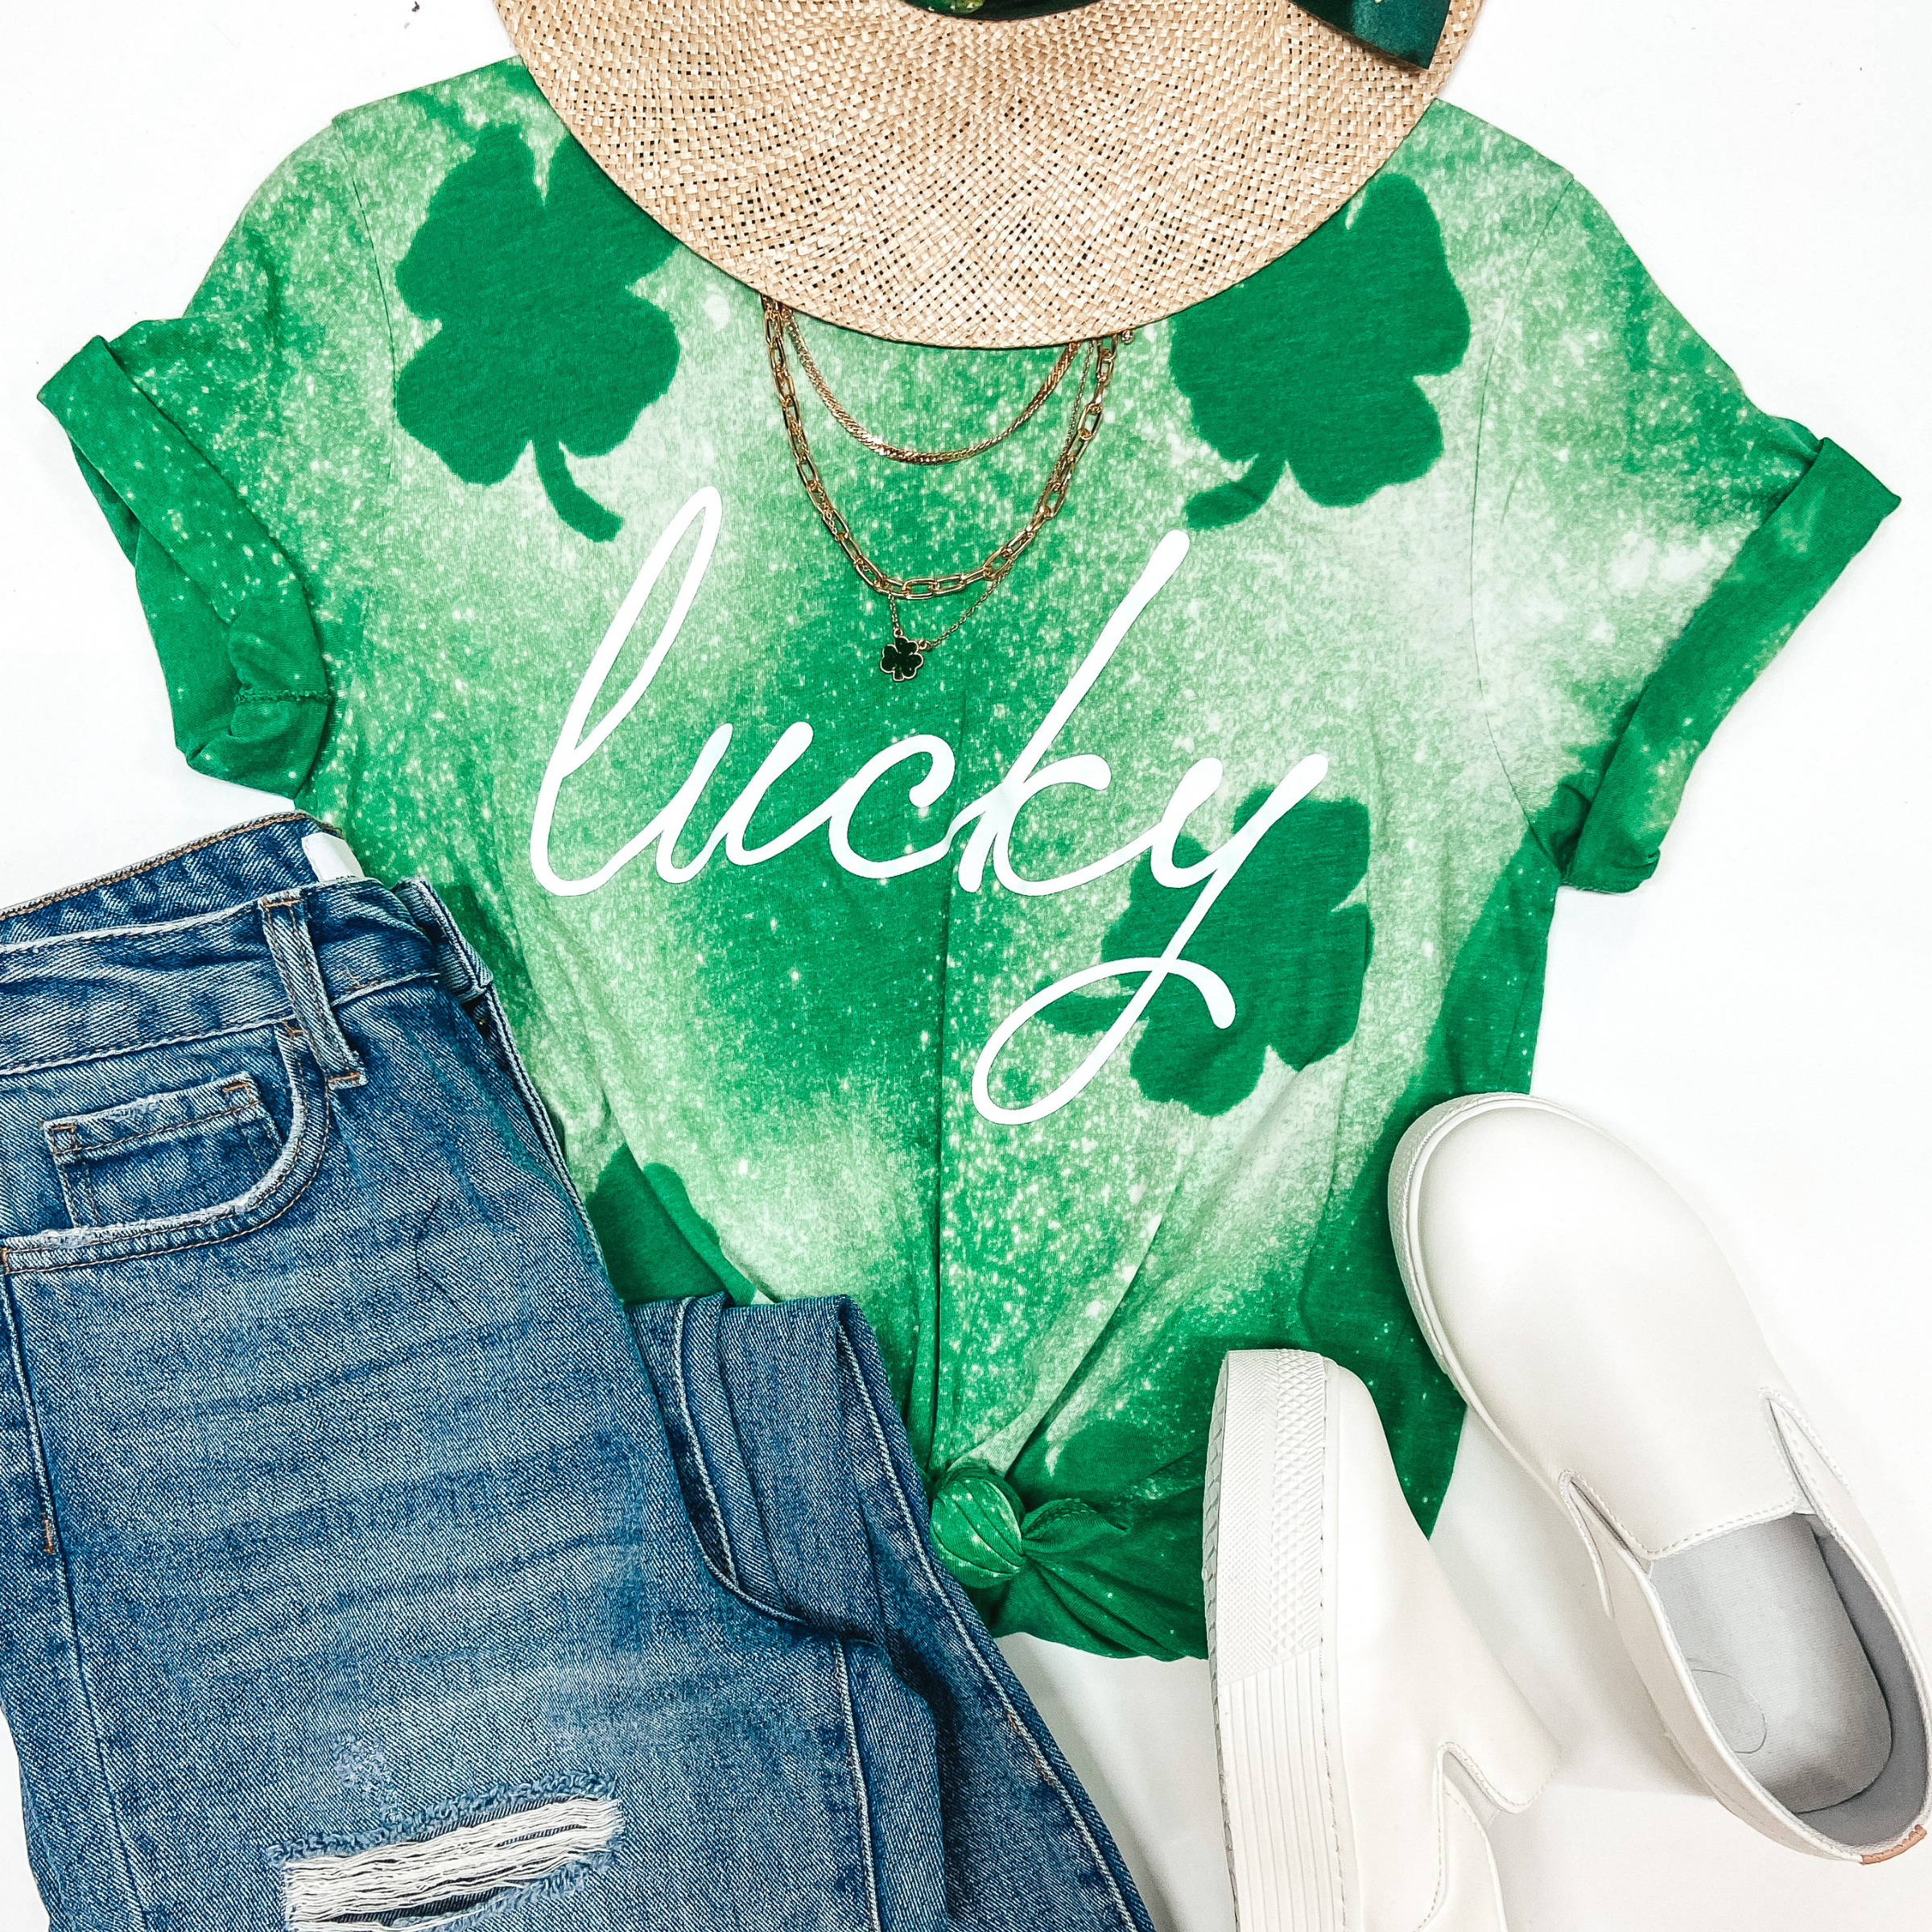 A green tee shirt with bleach splatter distressing and clovers that says "Lucky." pictured on white background with light wash jeans, white sneakers, and gold jewelry.